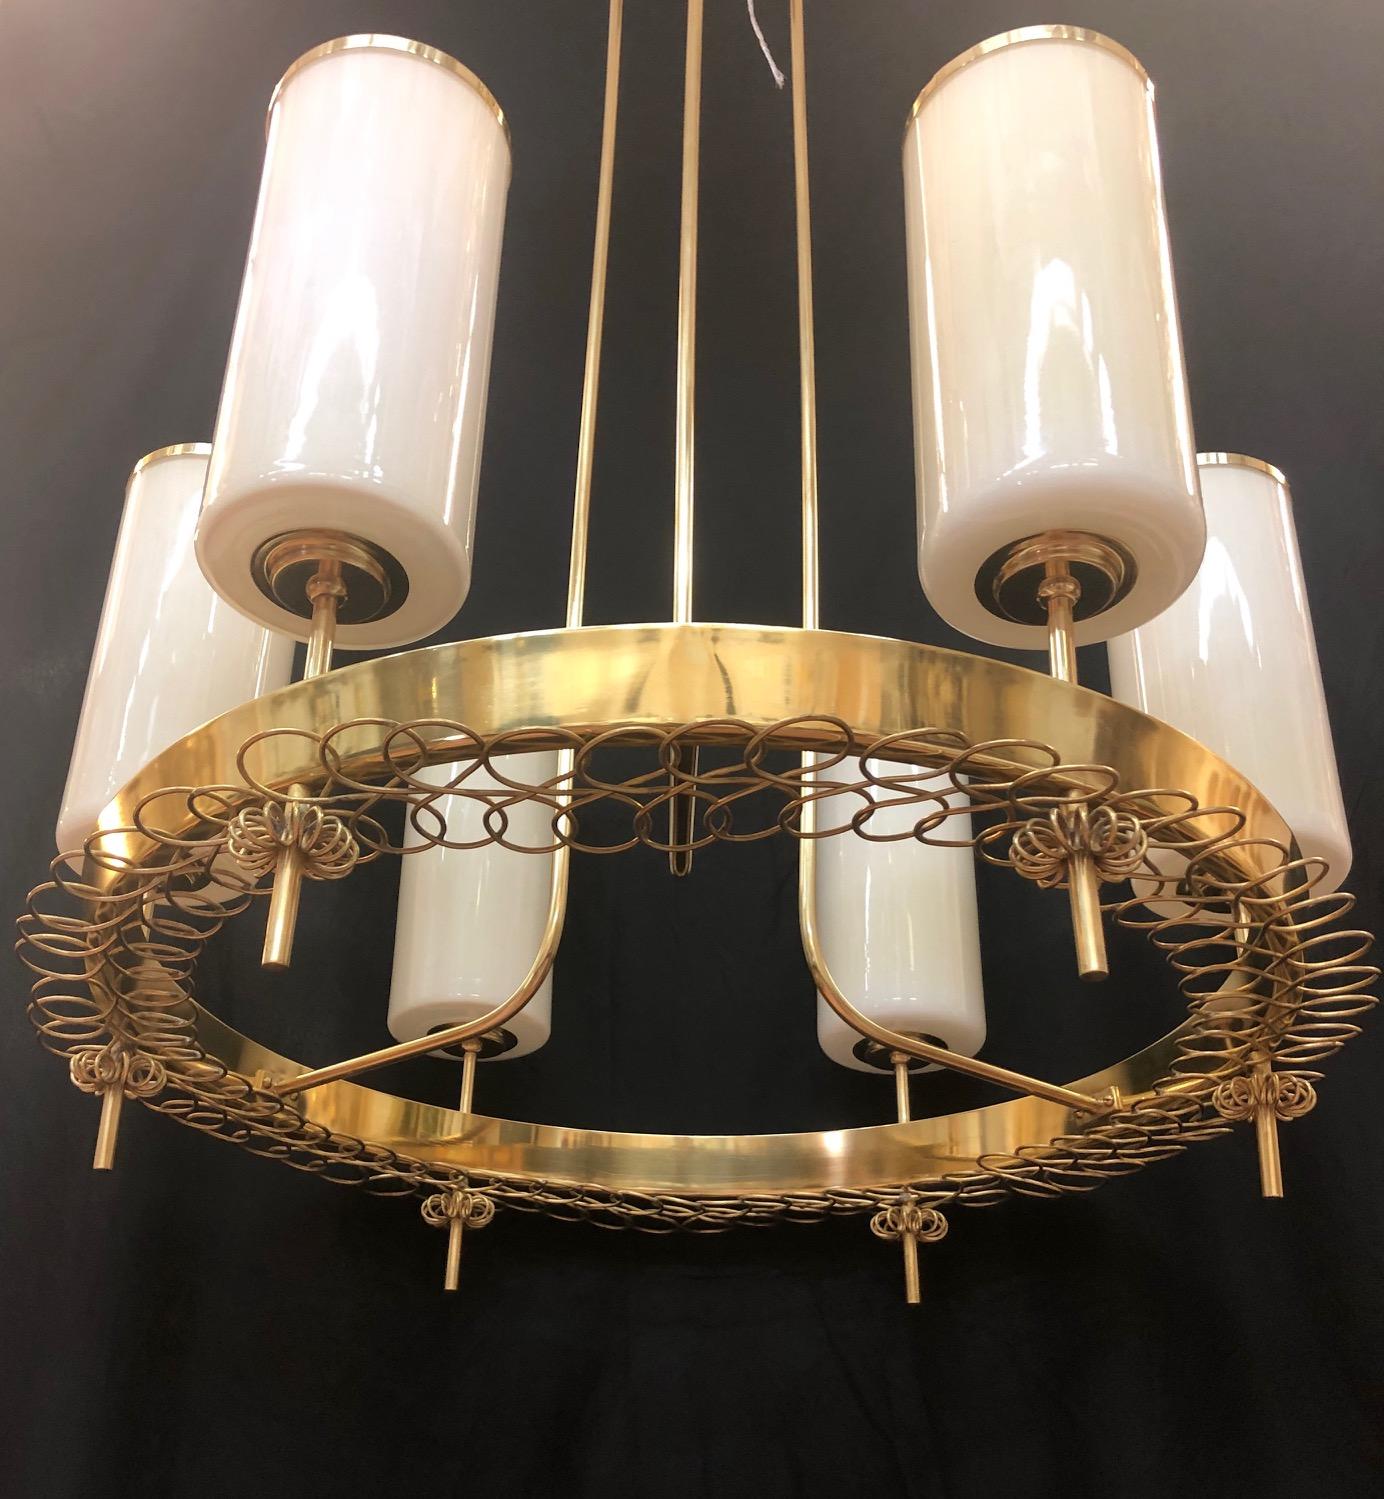 Large chandelier designed by Paavo Tynell for Taito Oy. Finland, circa 1940s.
Hand blown opaline glass shades with polished brass hardware.
Newly rewired.